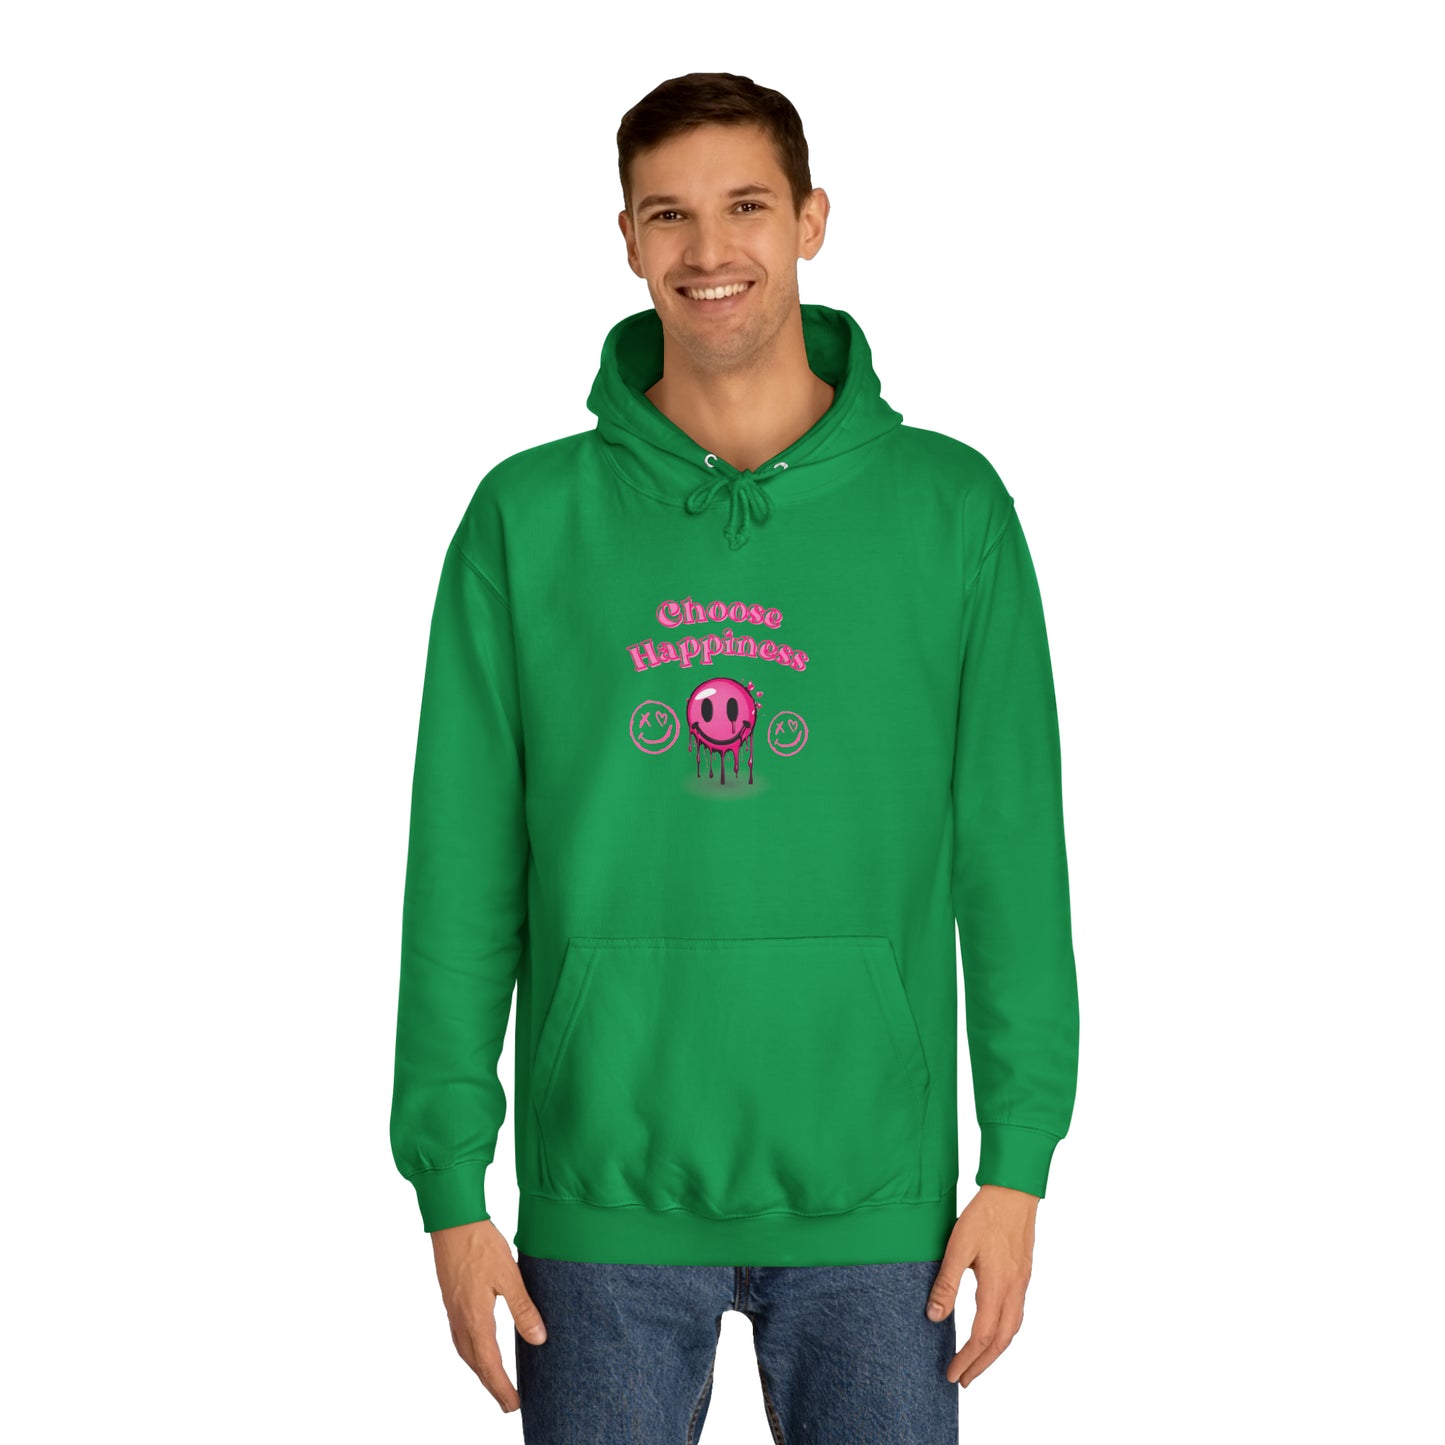 "Why Aren't You Smiling?" Unisex College Hoodie